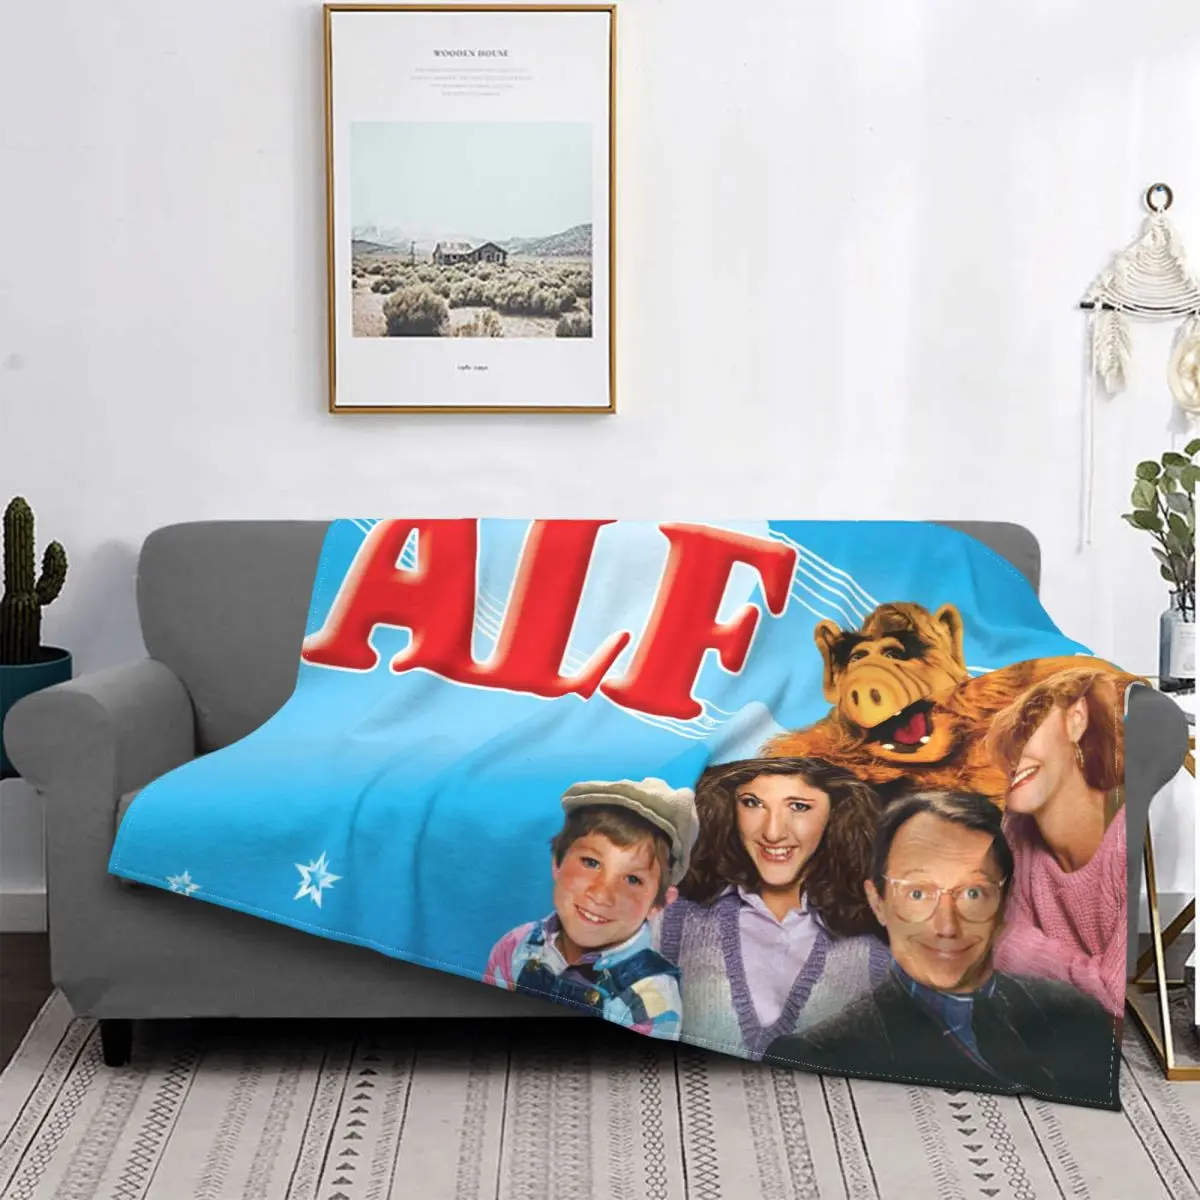 

Alien Life Form ALF Meme Collage Blanket Warm Fleece Soft Flannel Tv Blankets for Bedding Couch Office Autumn Show Throw